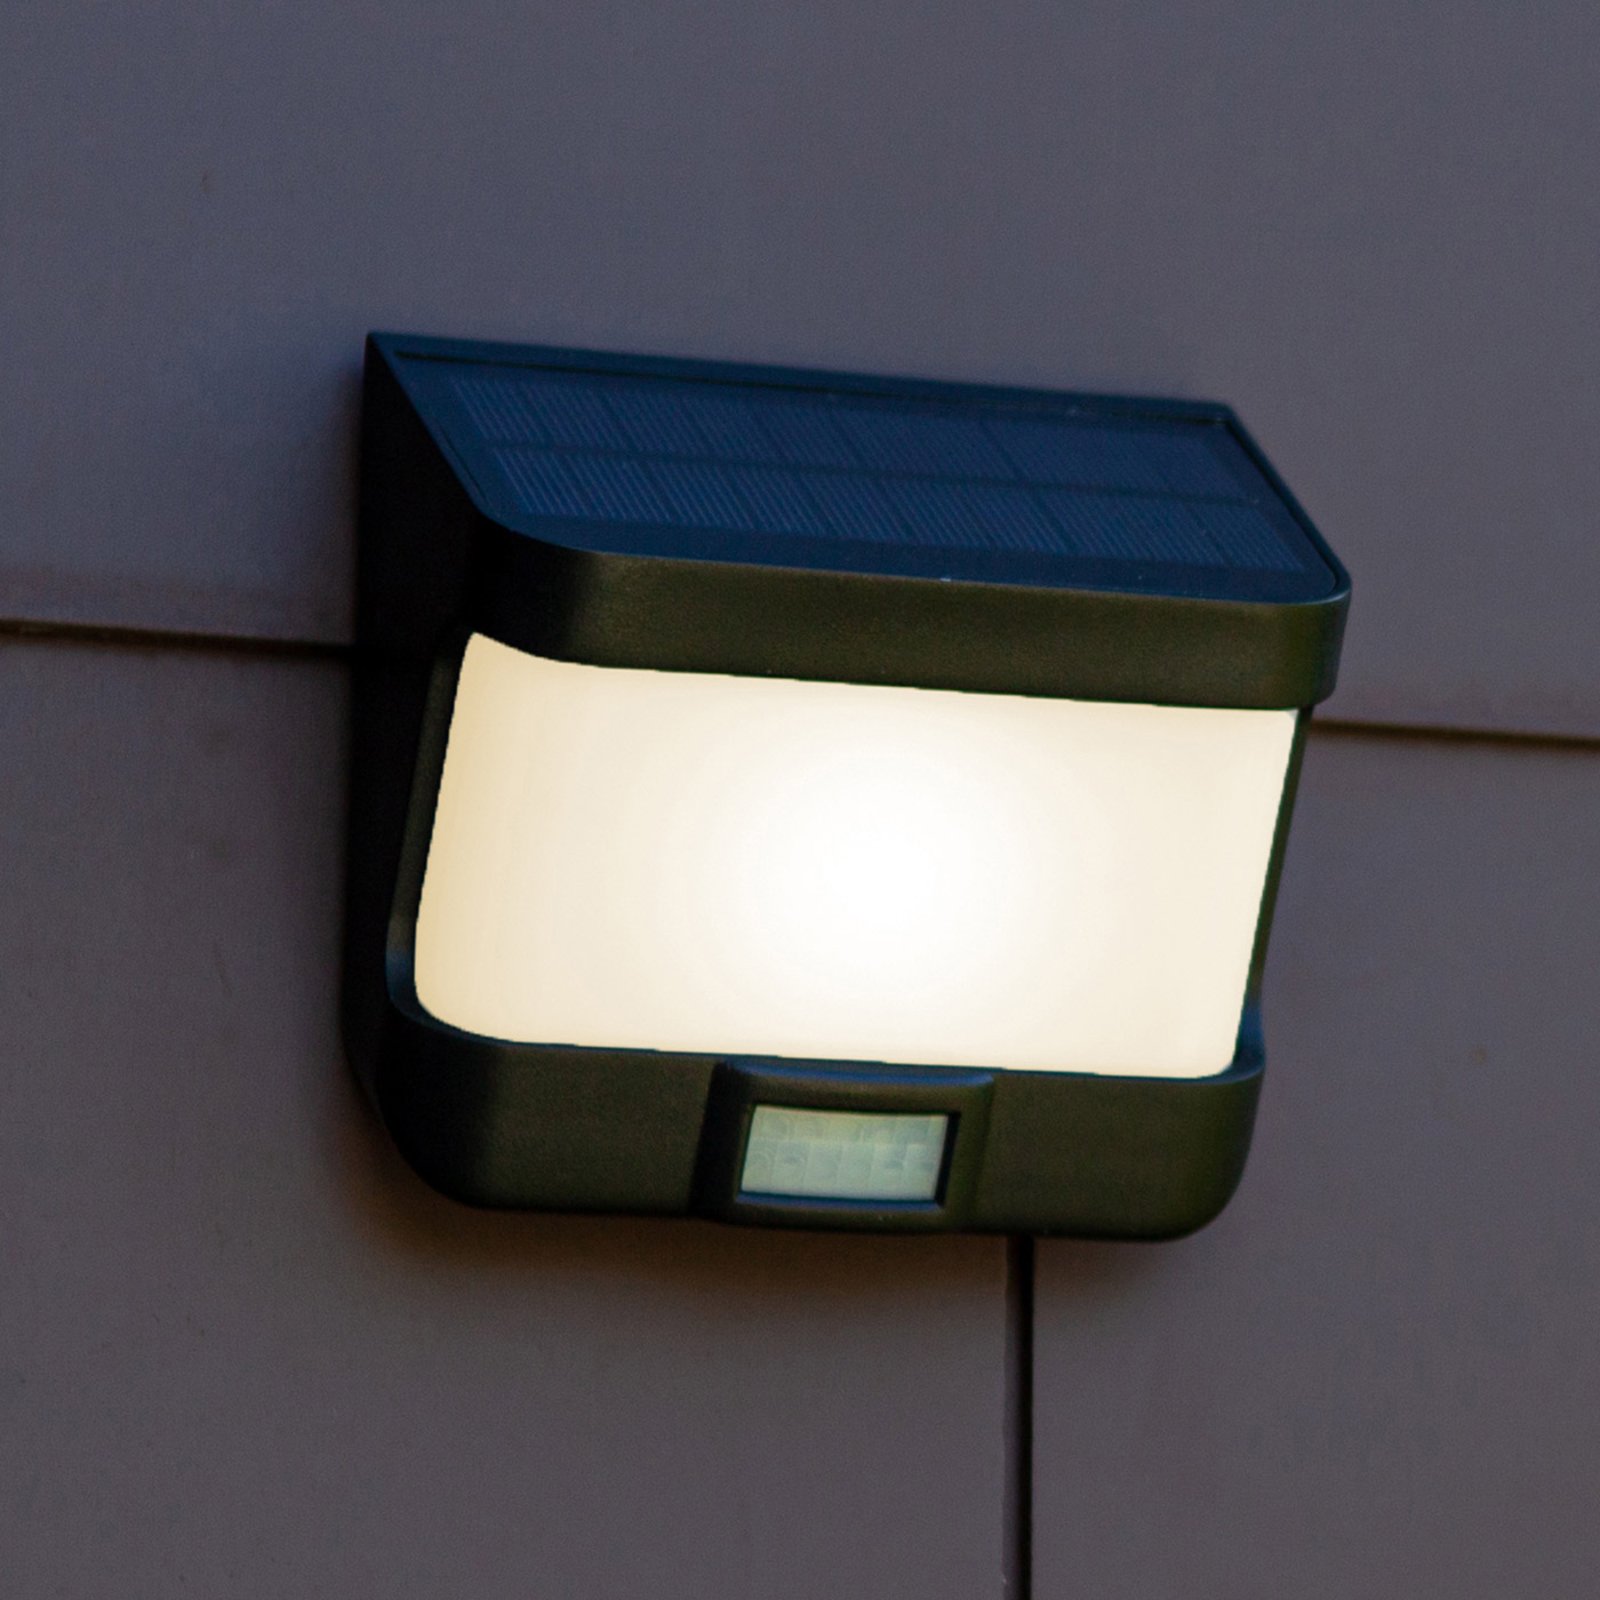 Try LED solar wall light with a motion detector